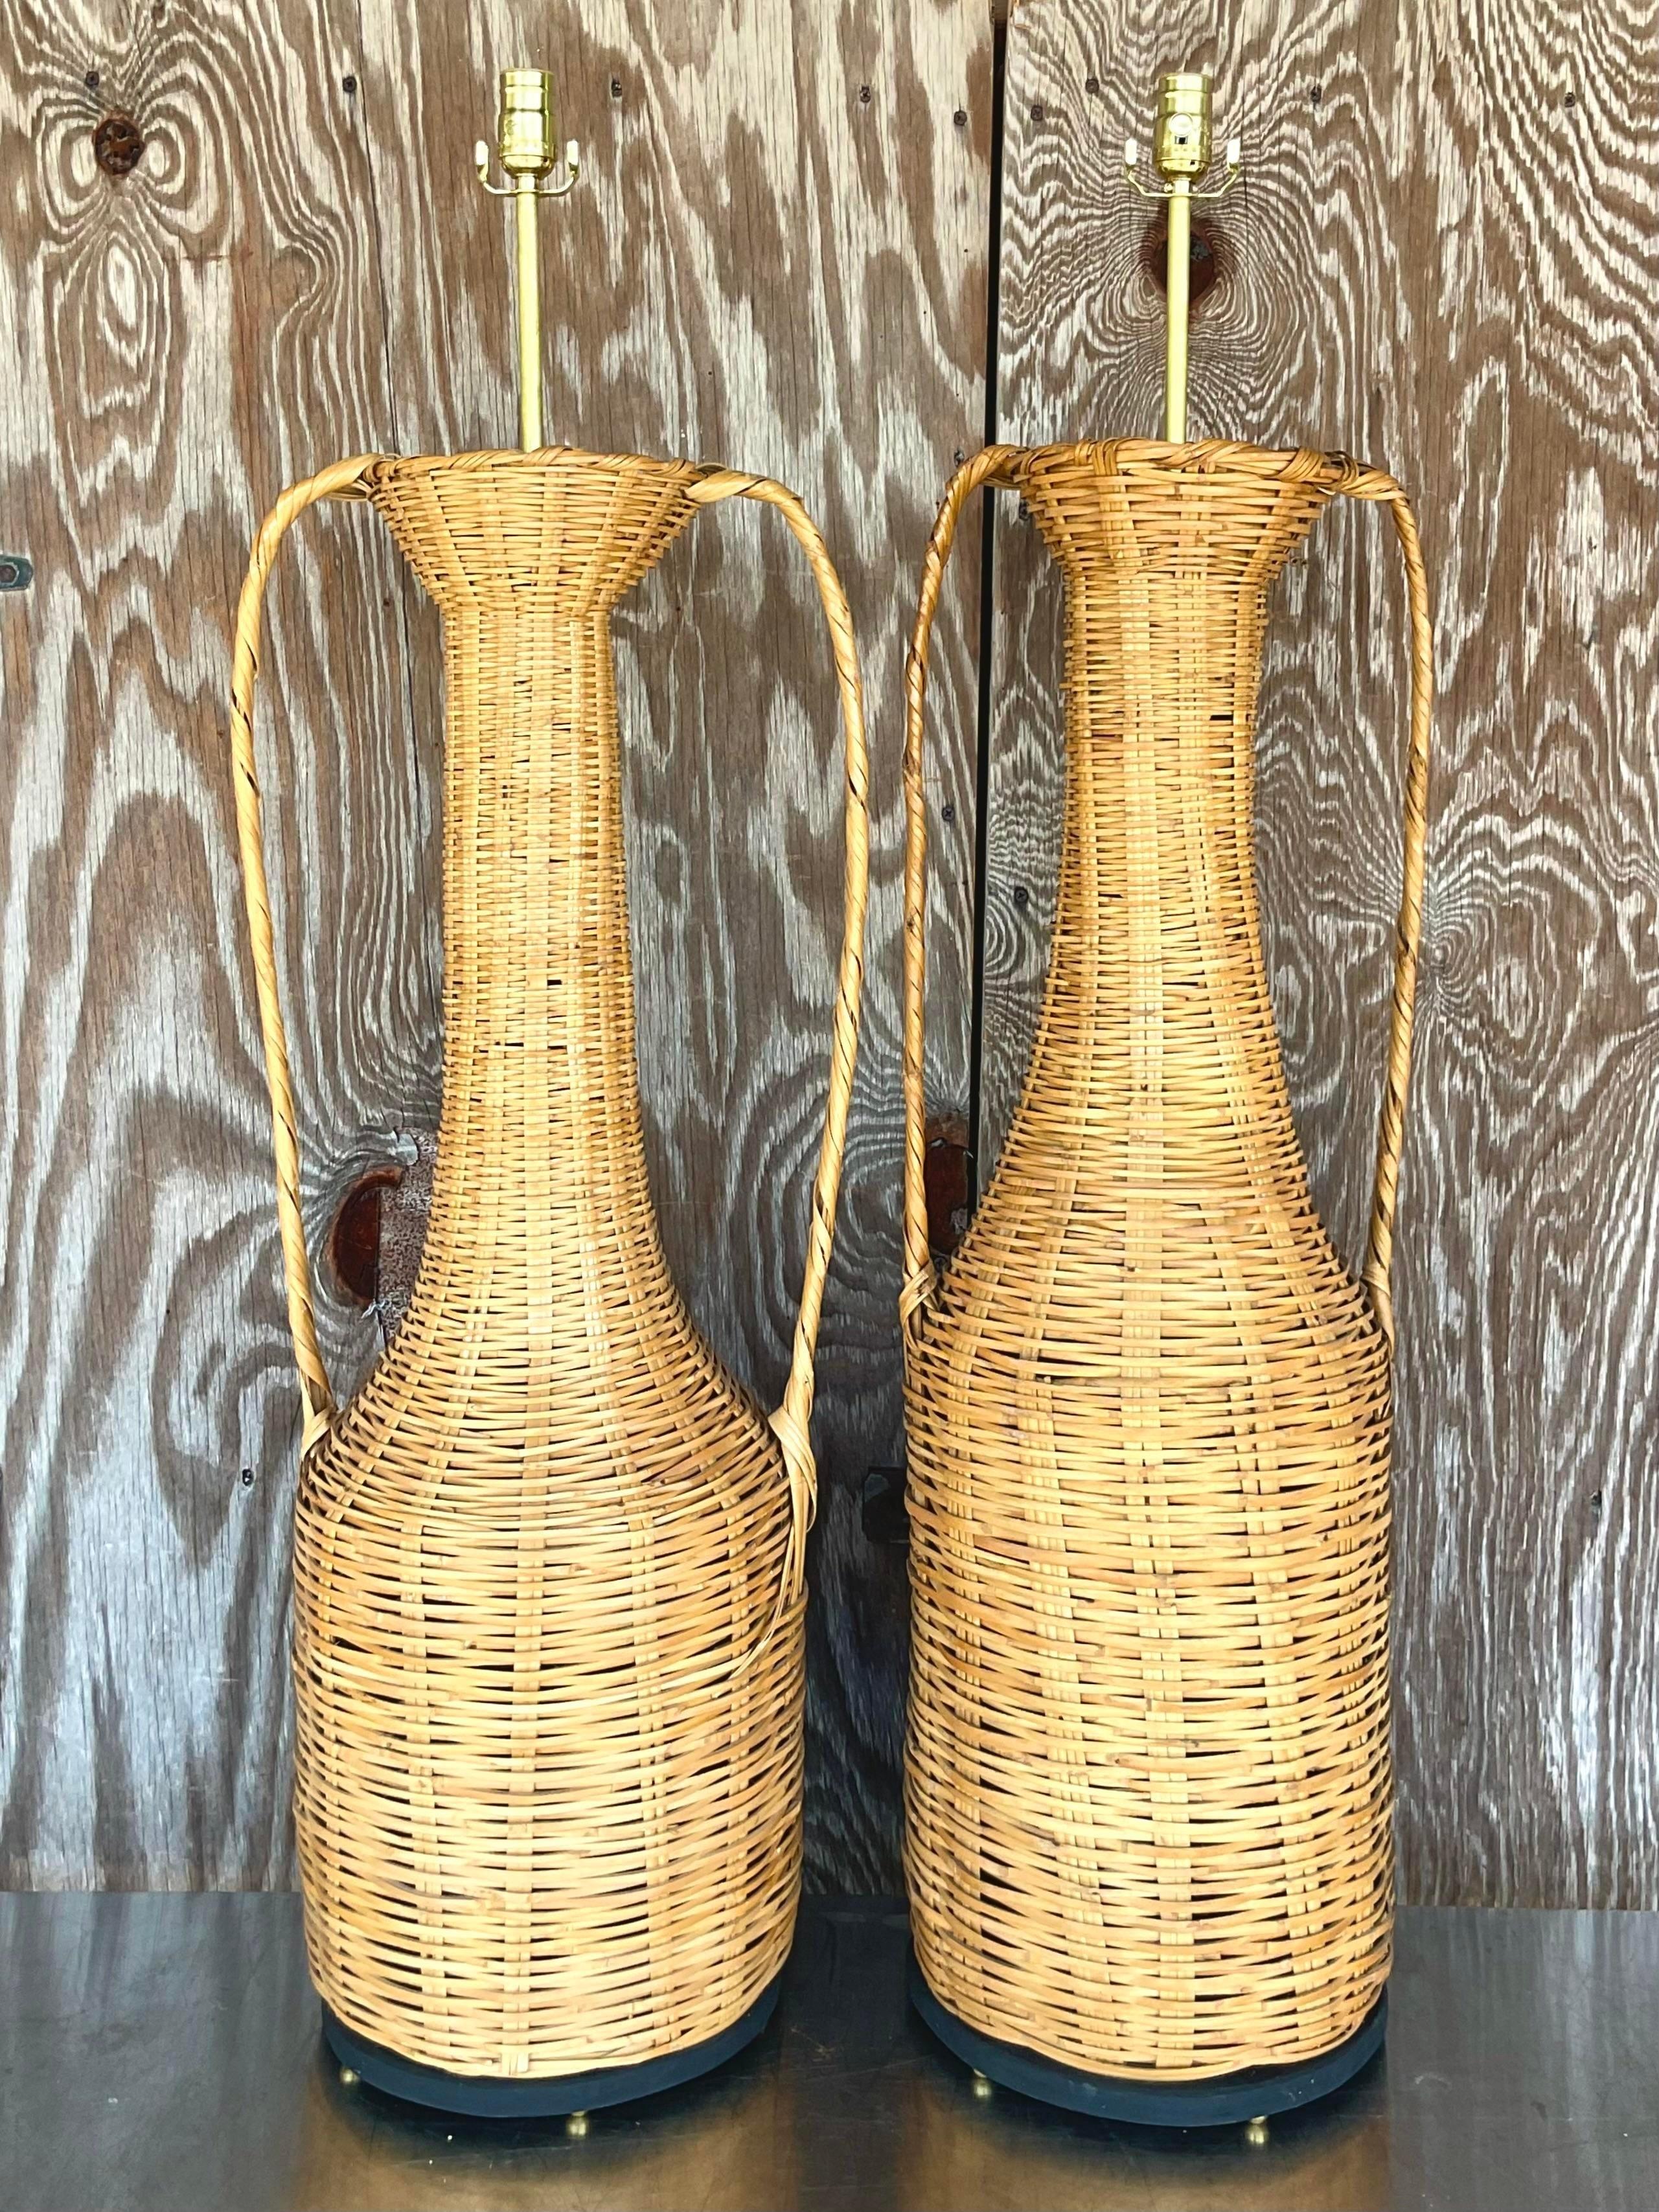 A fantastic set of vintage Coastal table lamps. A beautiful woven rattan on raised plinths. Mismatched handles make these lamps something special. Fully restored with all new wiring and hardware. Acquired from a Palm Beach estate.

Smaller lamp